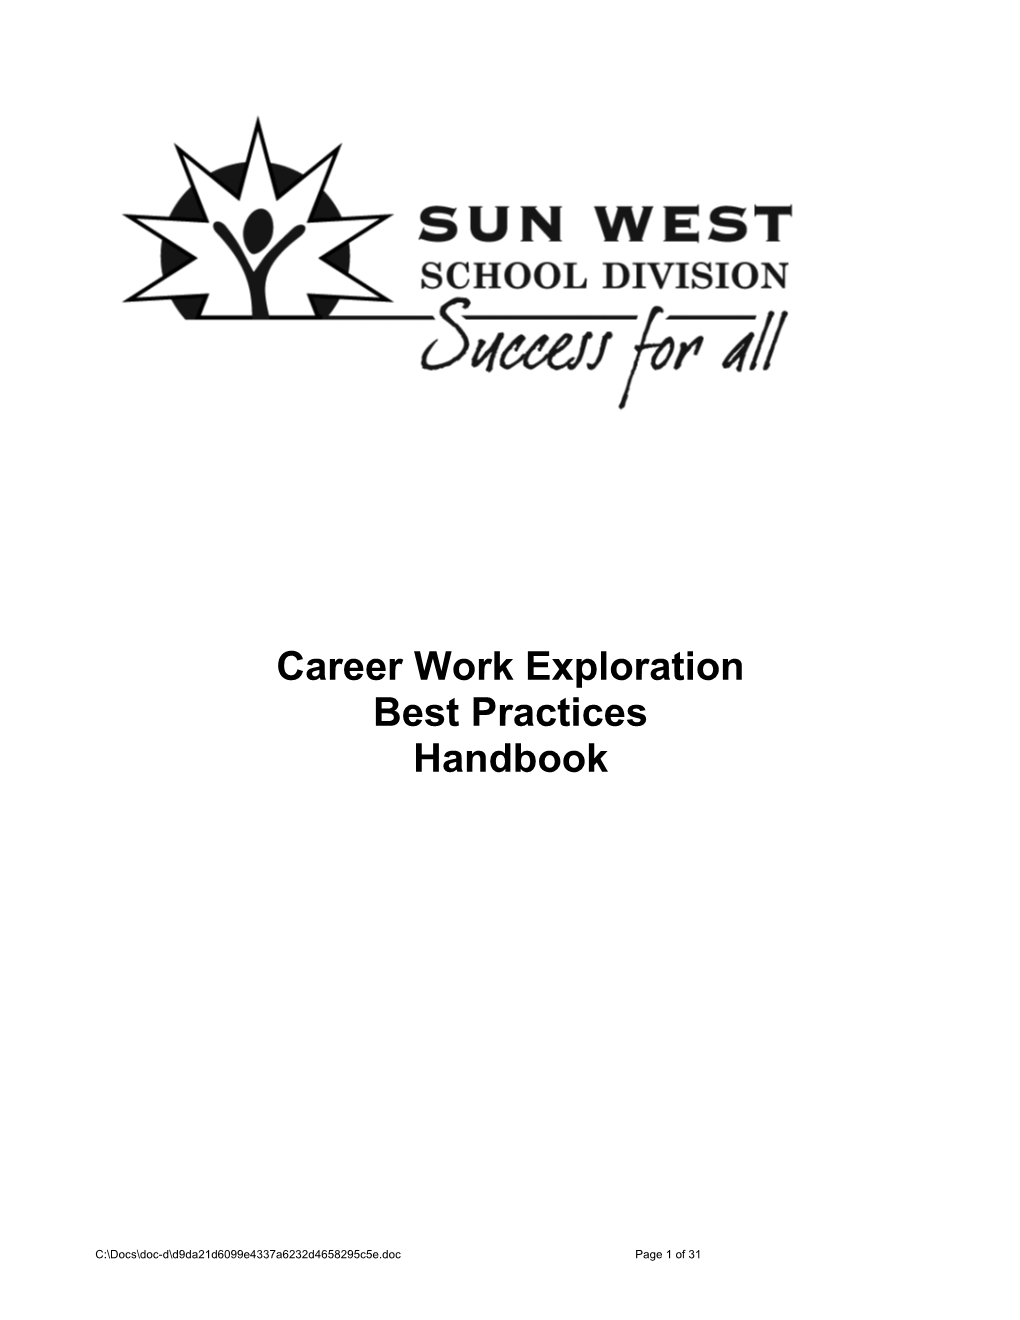 Career and Work Exploration Policies and Procedures